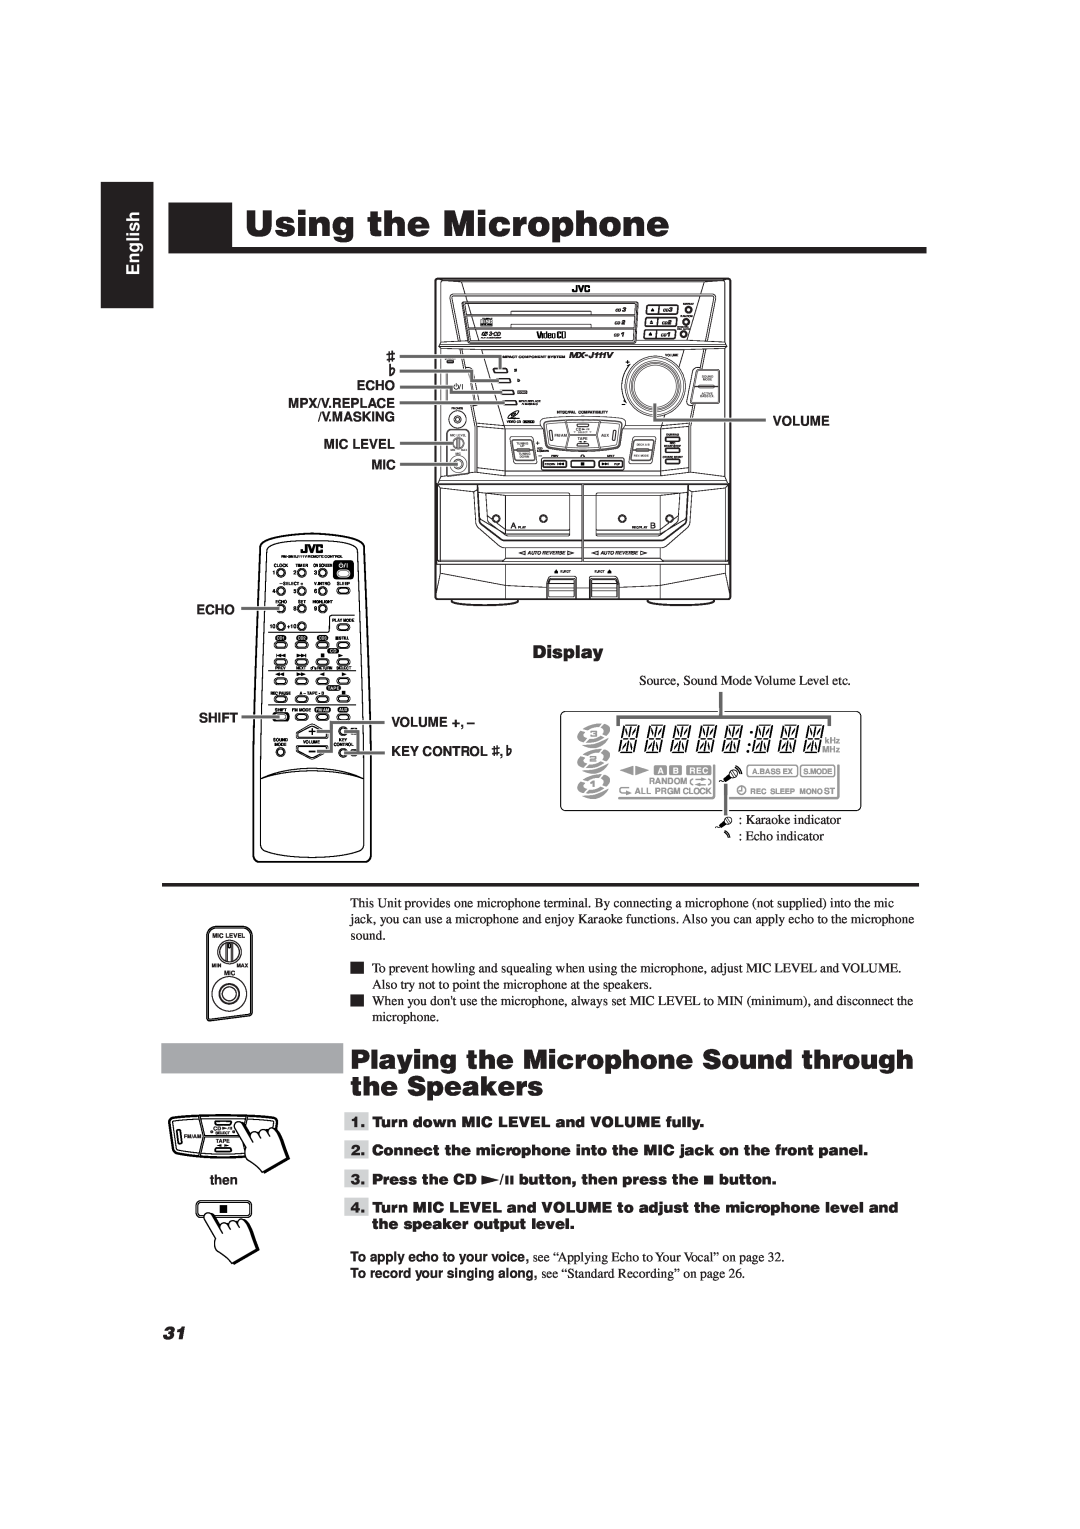 JVC MX-J111V Using the Microphone, Playing the Microphone Sound through the Speakers, English, Display, Echo, Volume, then 